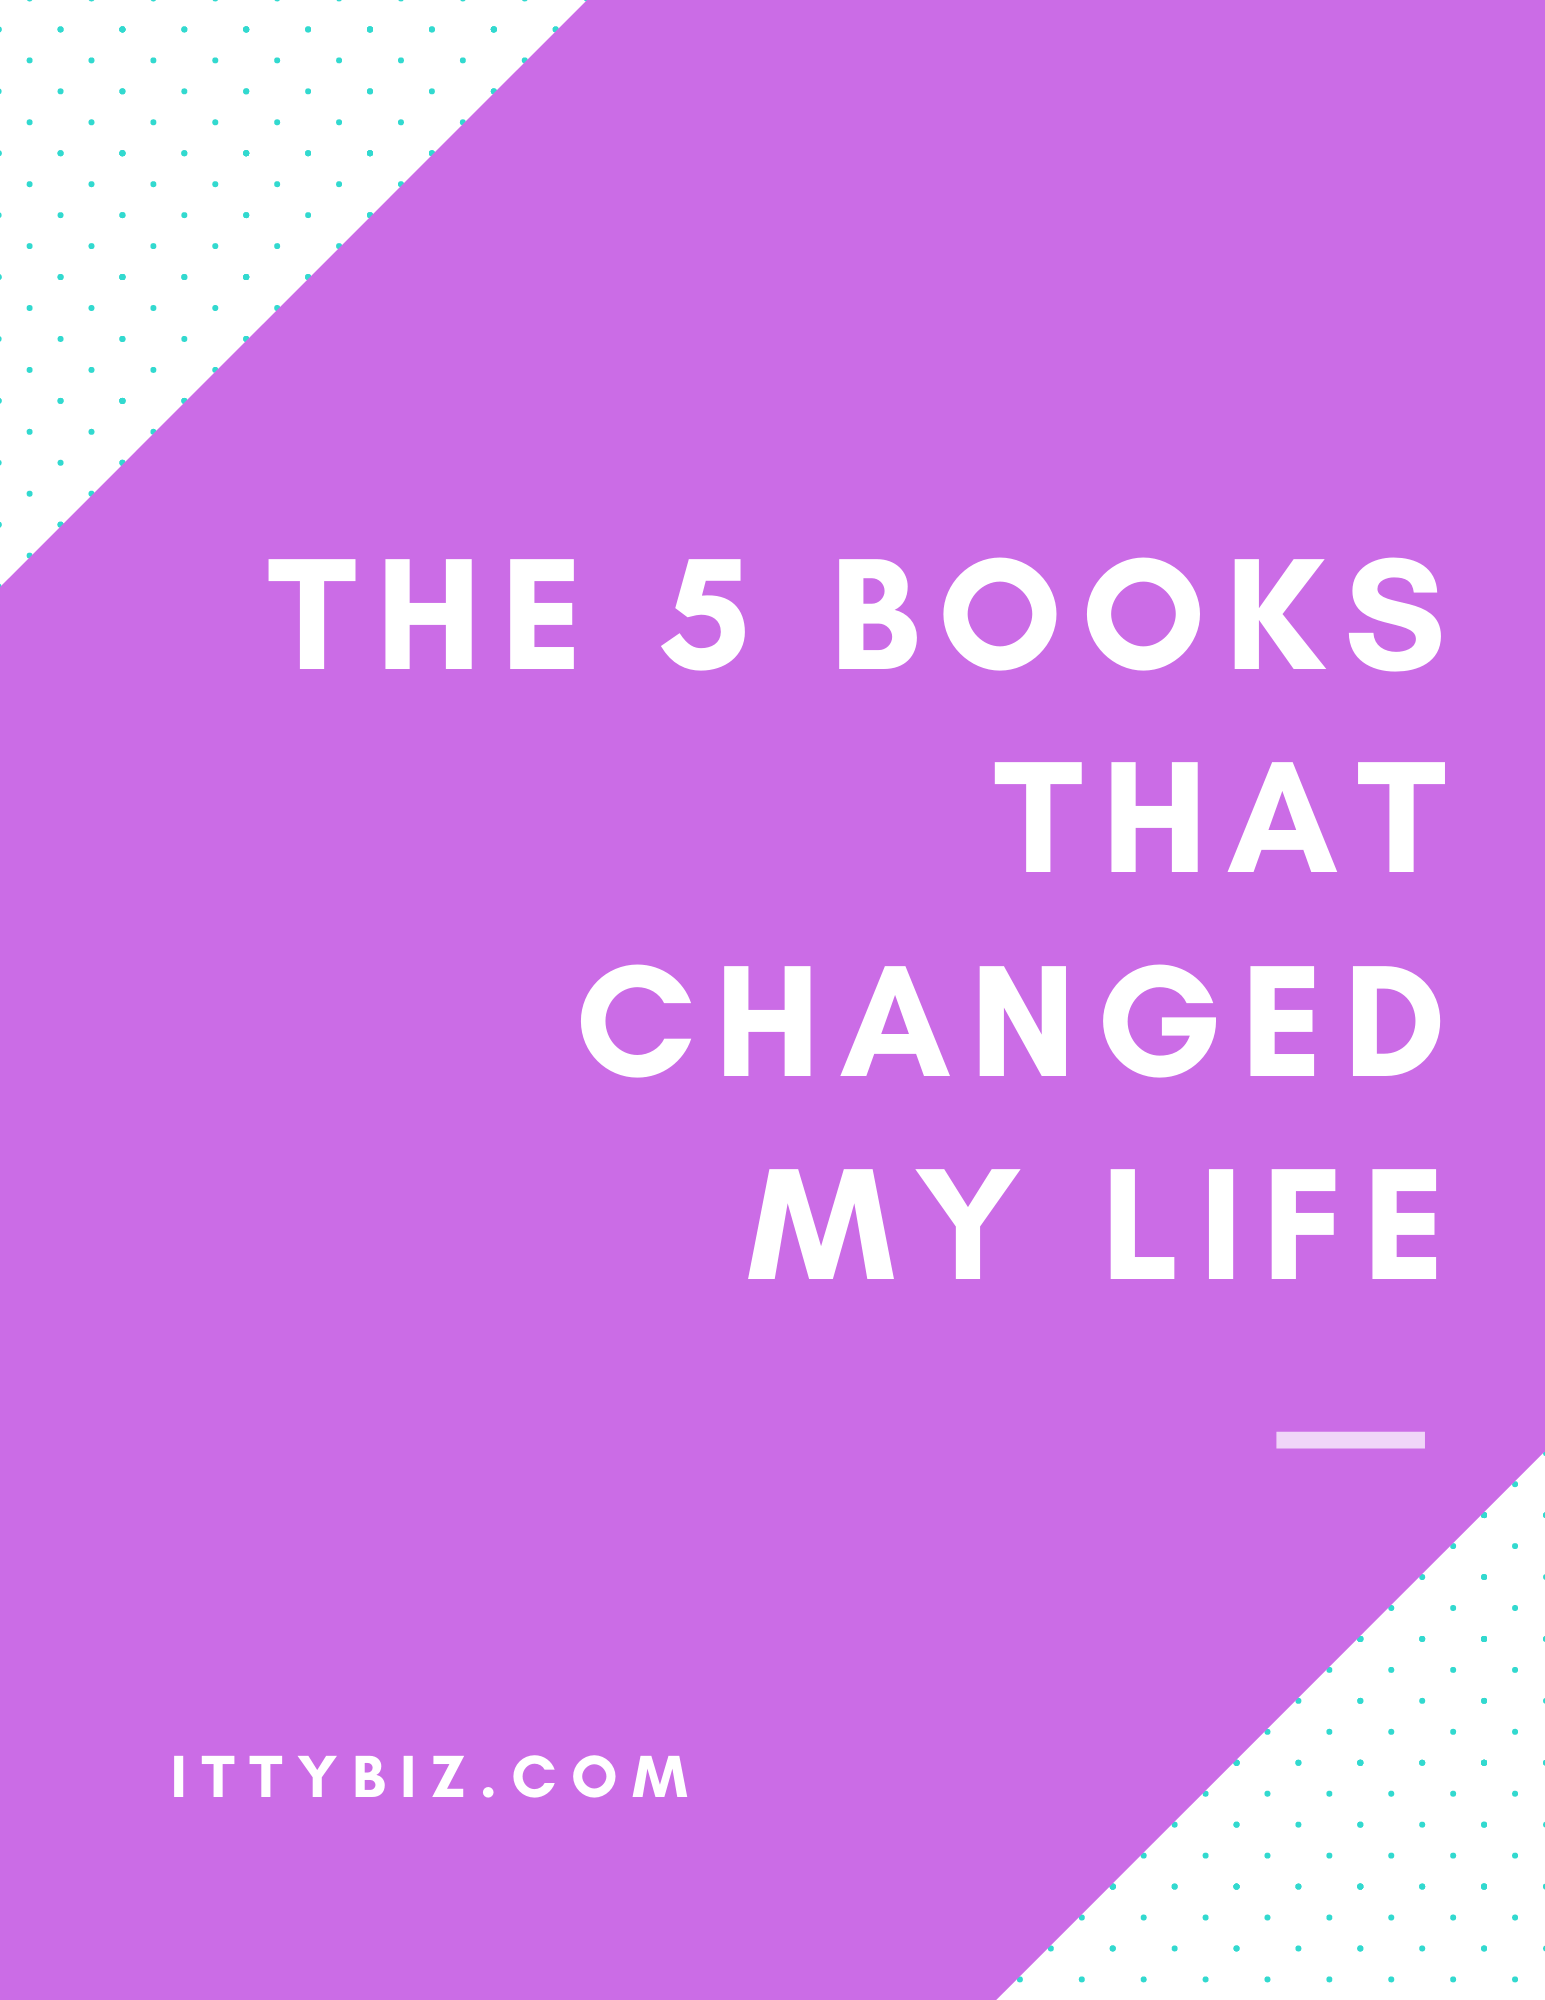 The 5 Books That Changed My Life